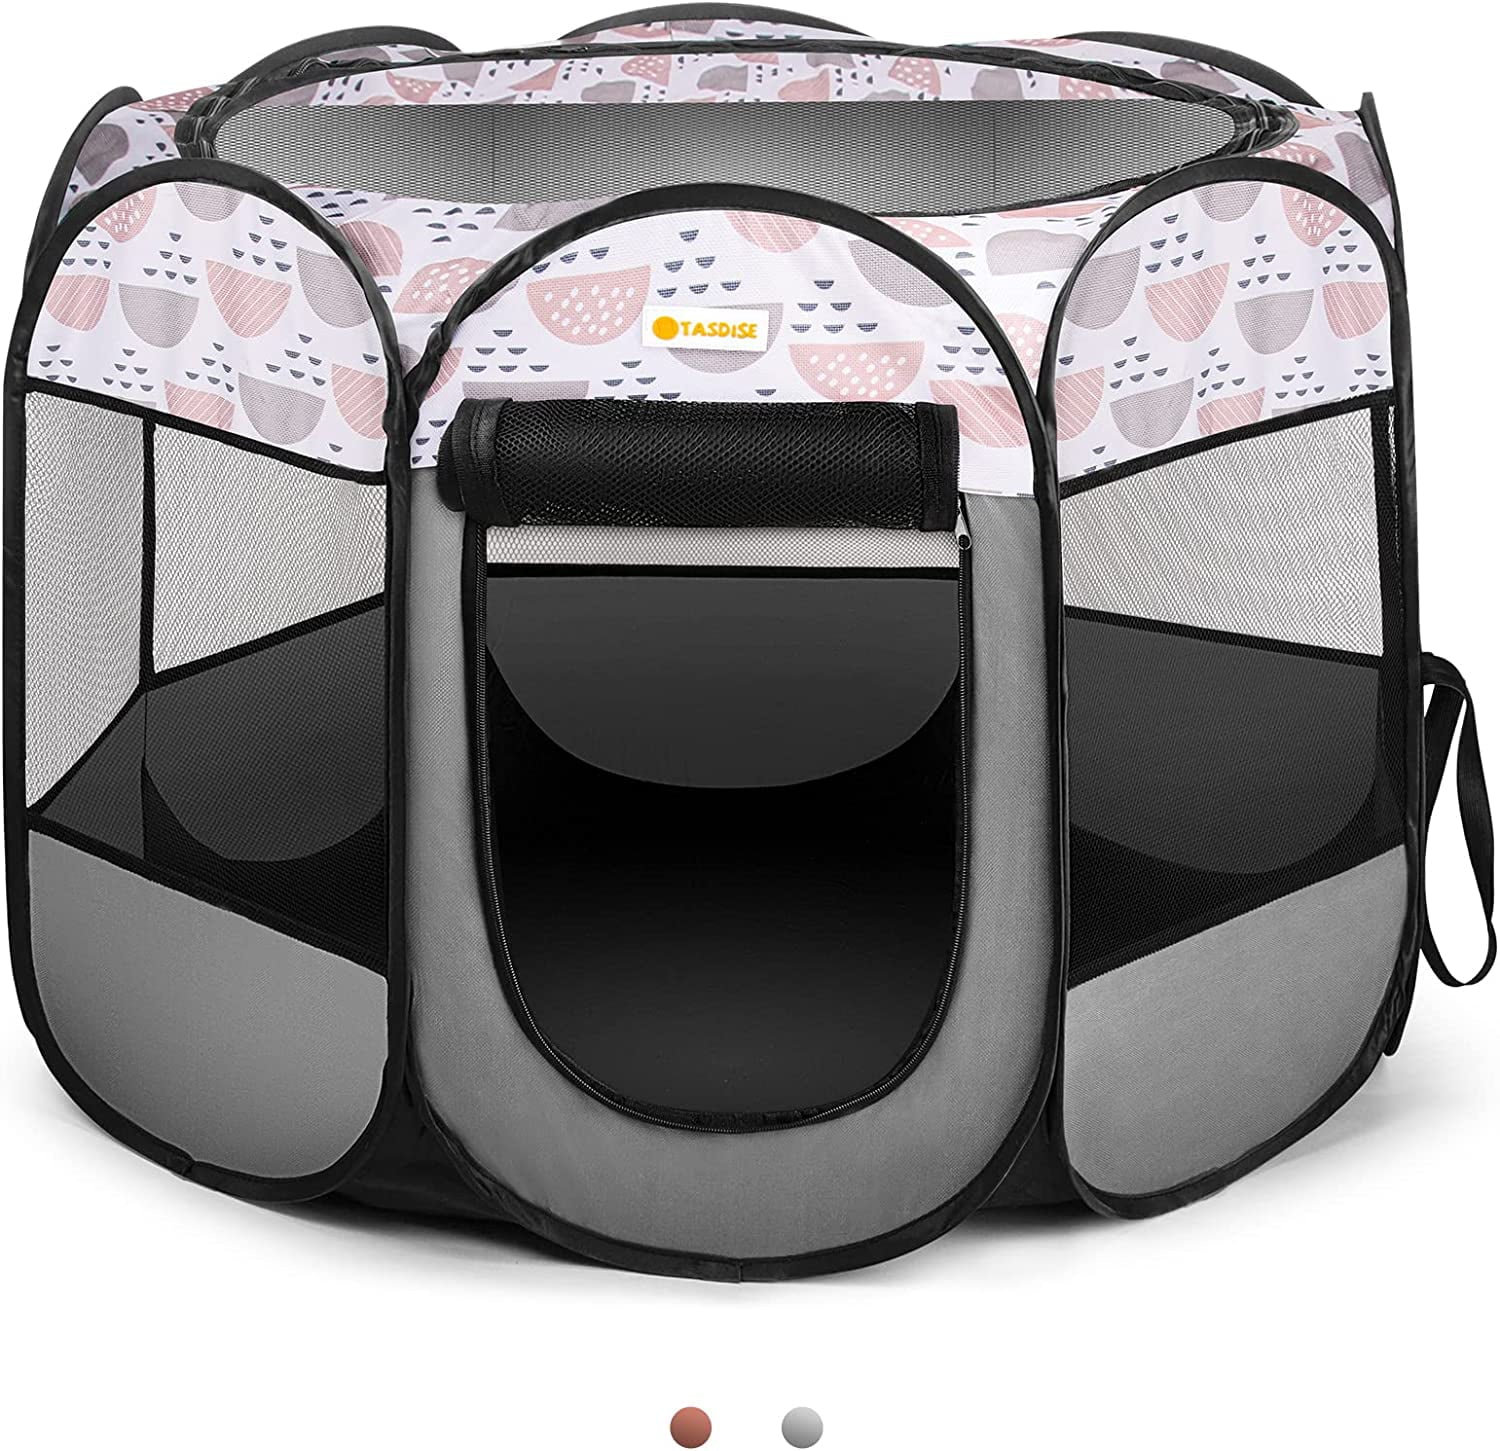 Portable Dog playpen Foldable Exercise Kennel Tent for Cats Puppy Rabbits 600D Oxford 36